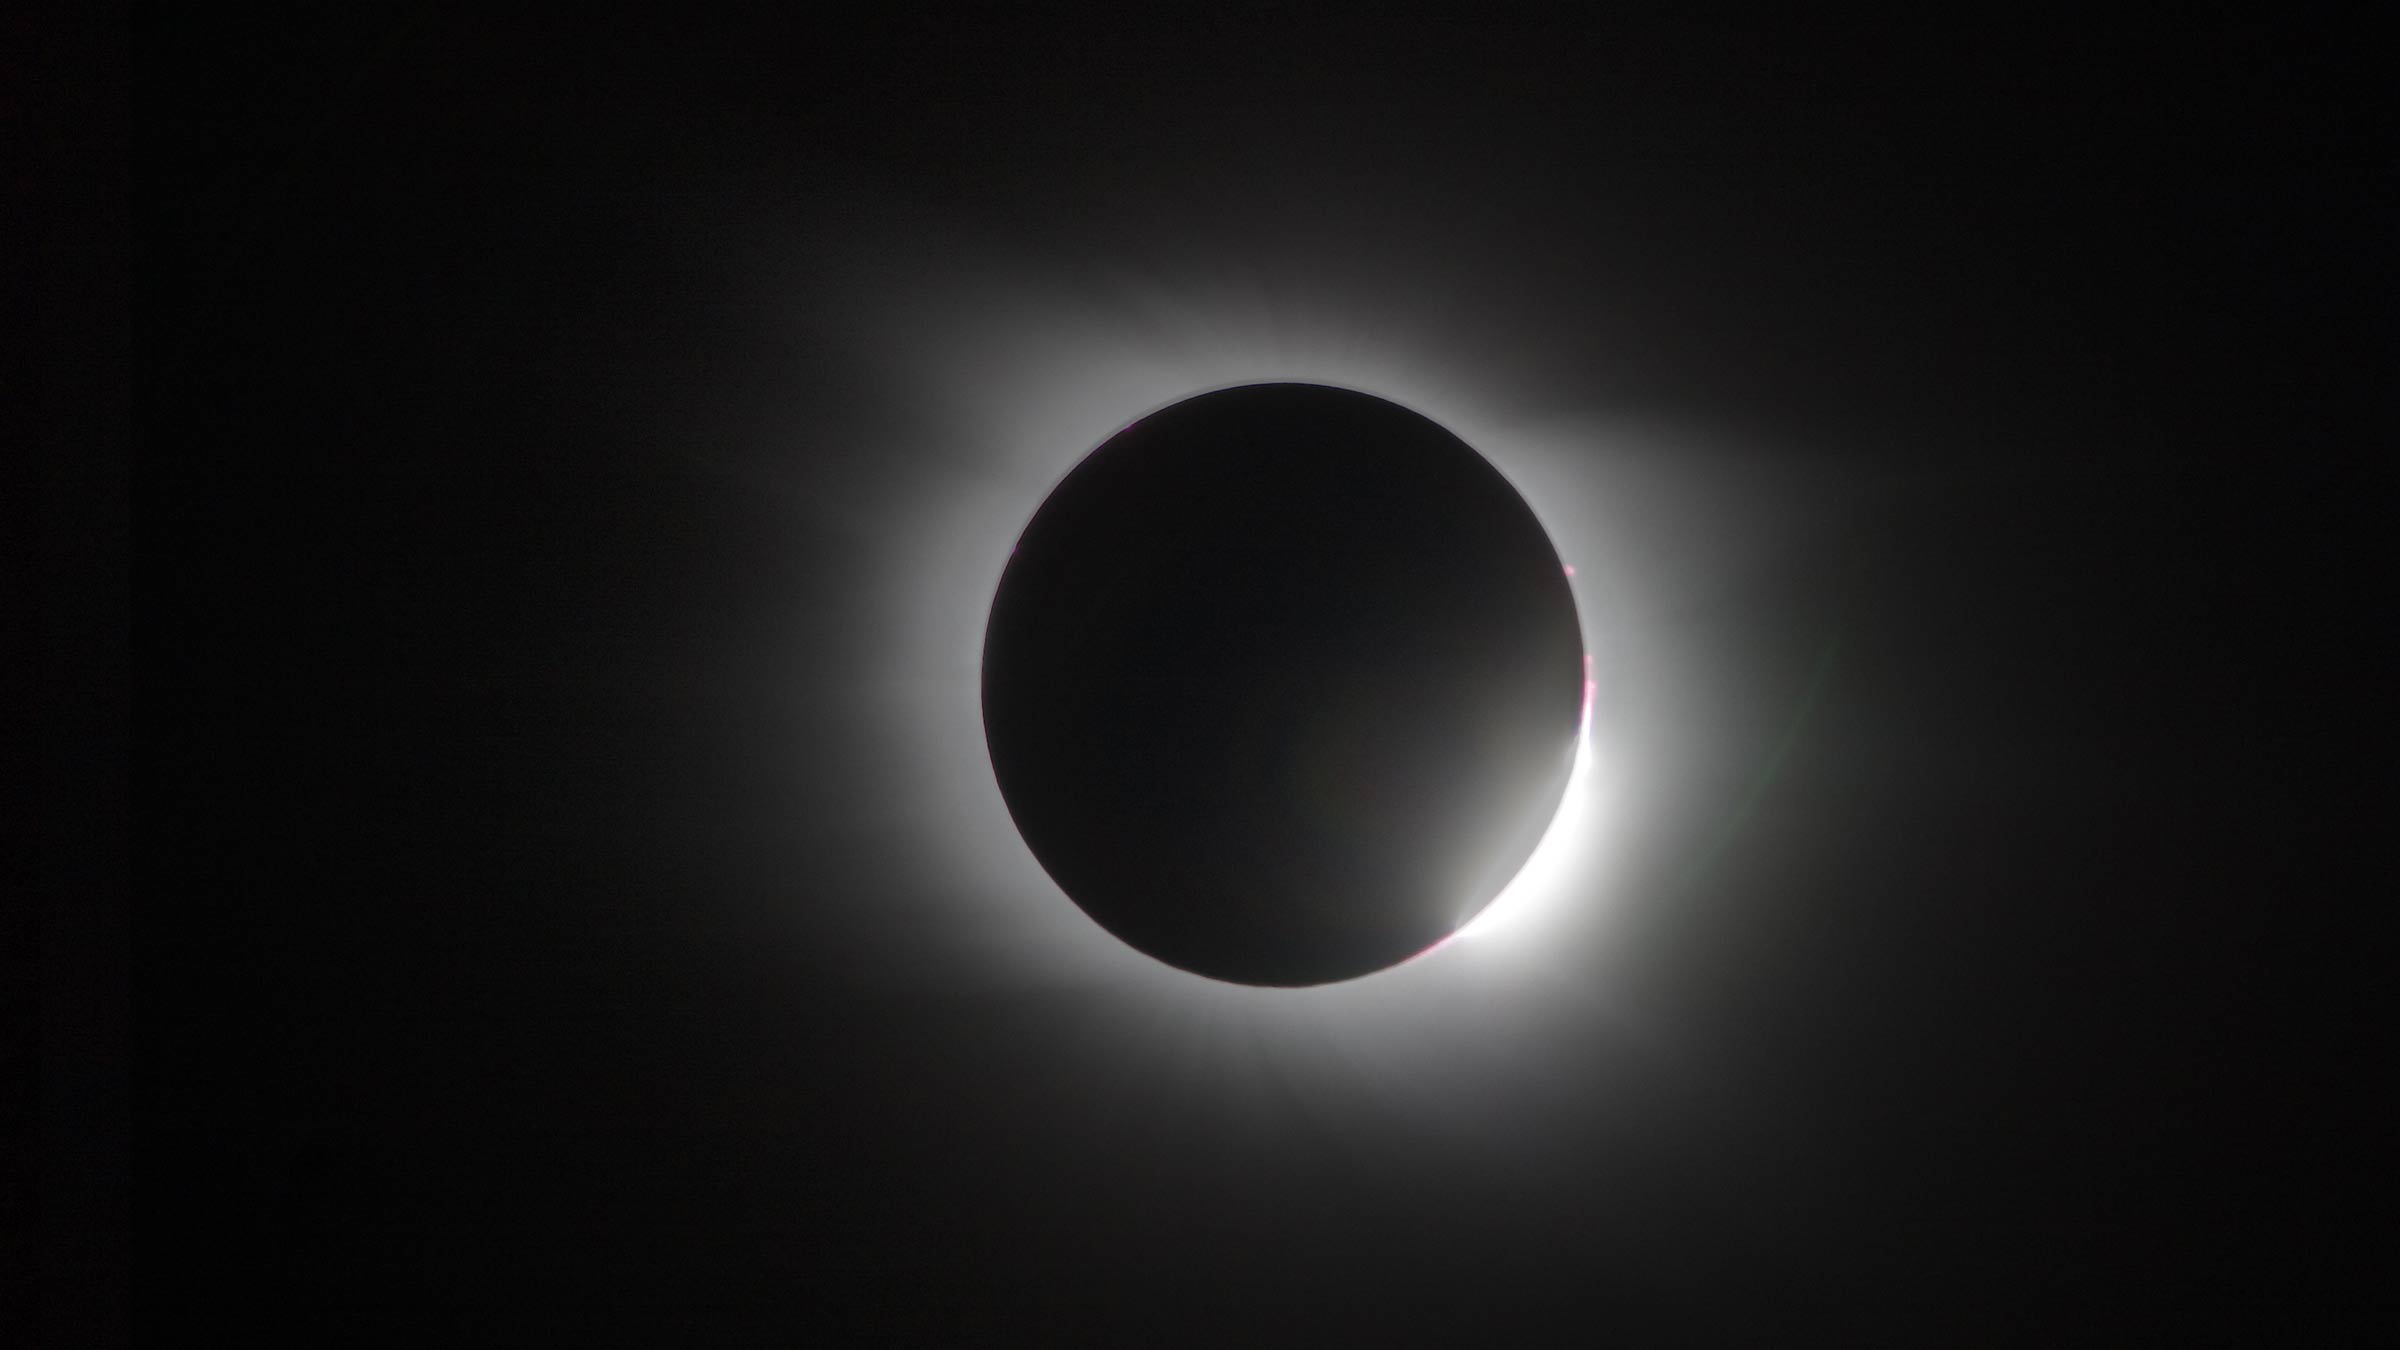 A total solar eclipse diamond ring effect before totality